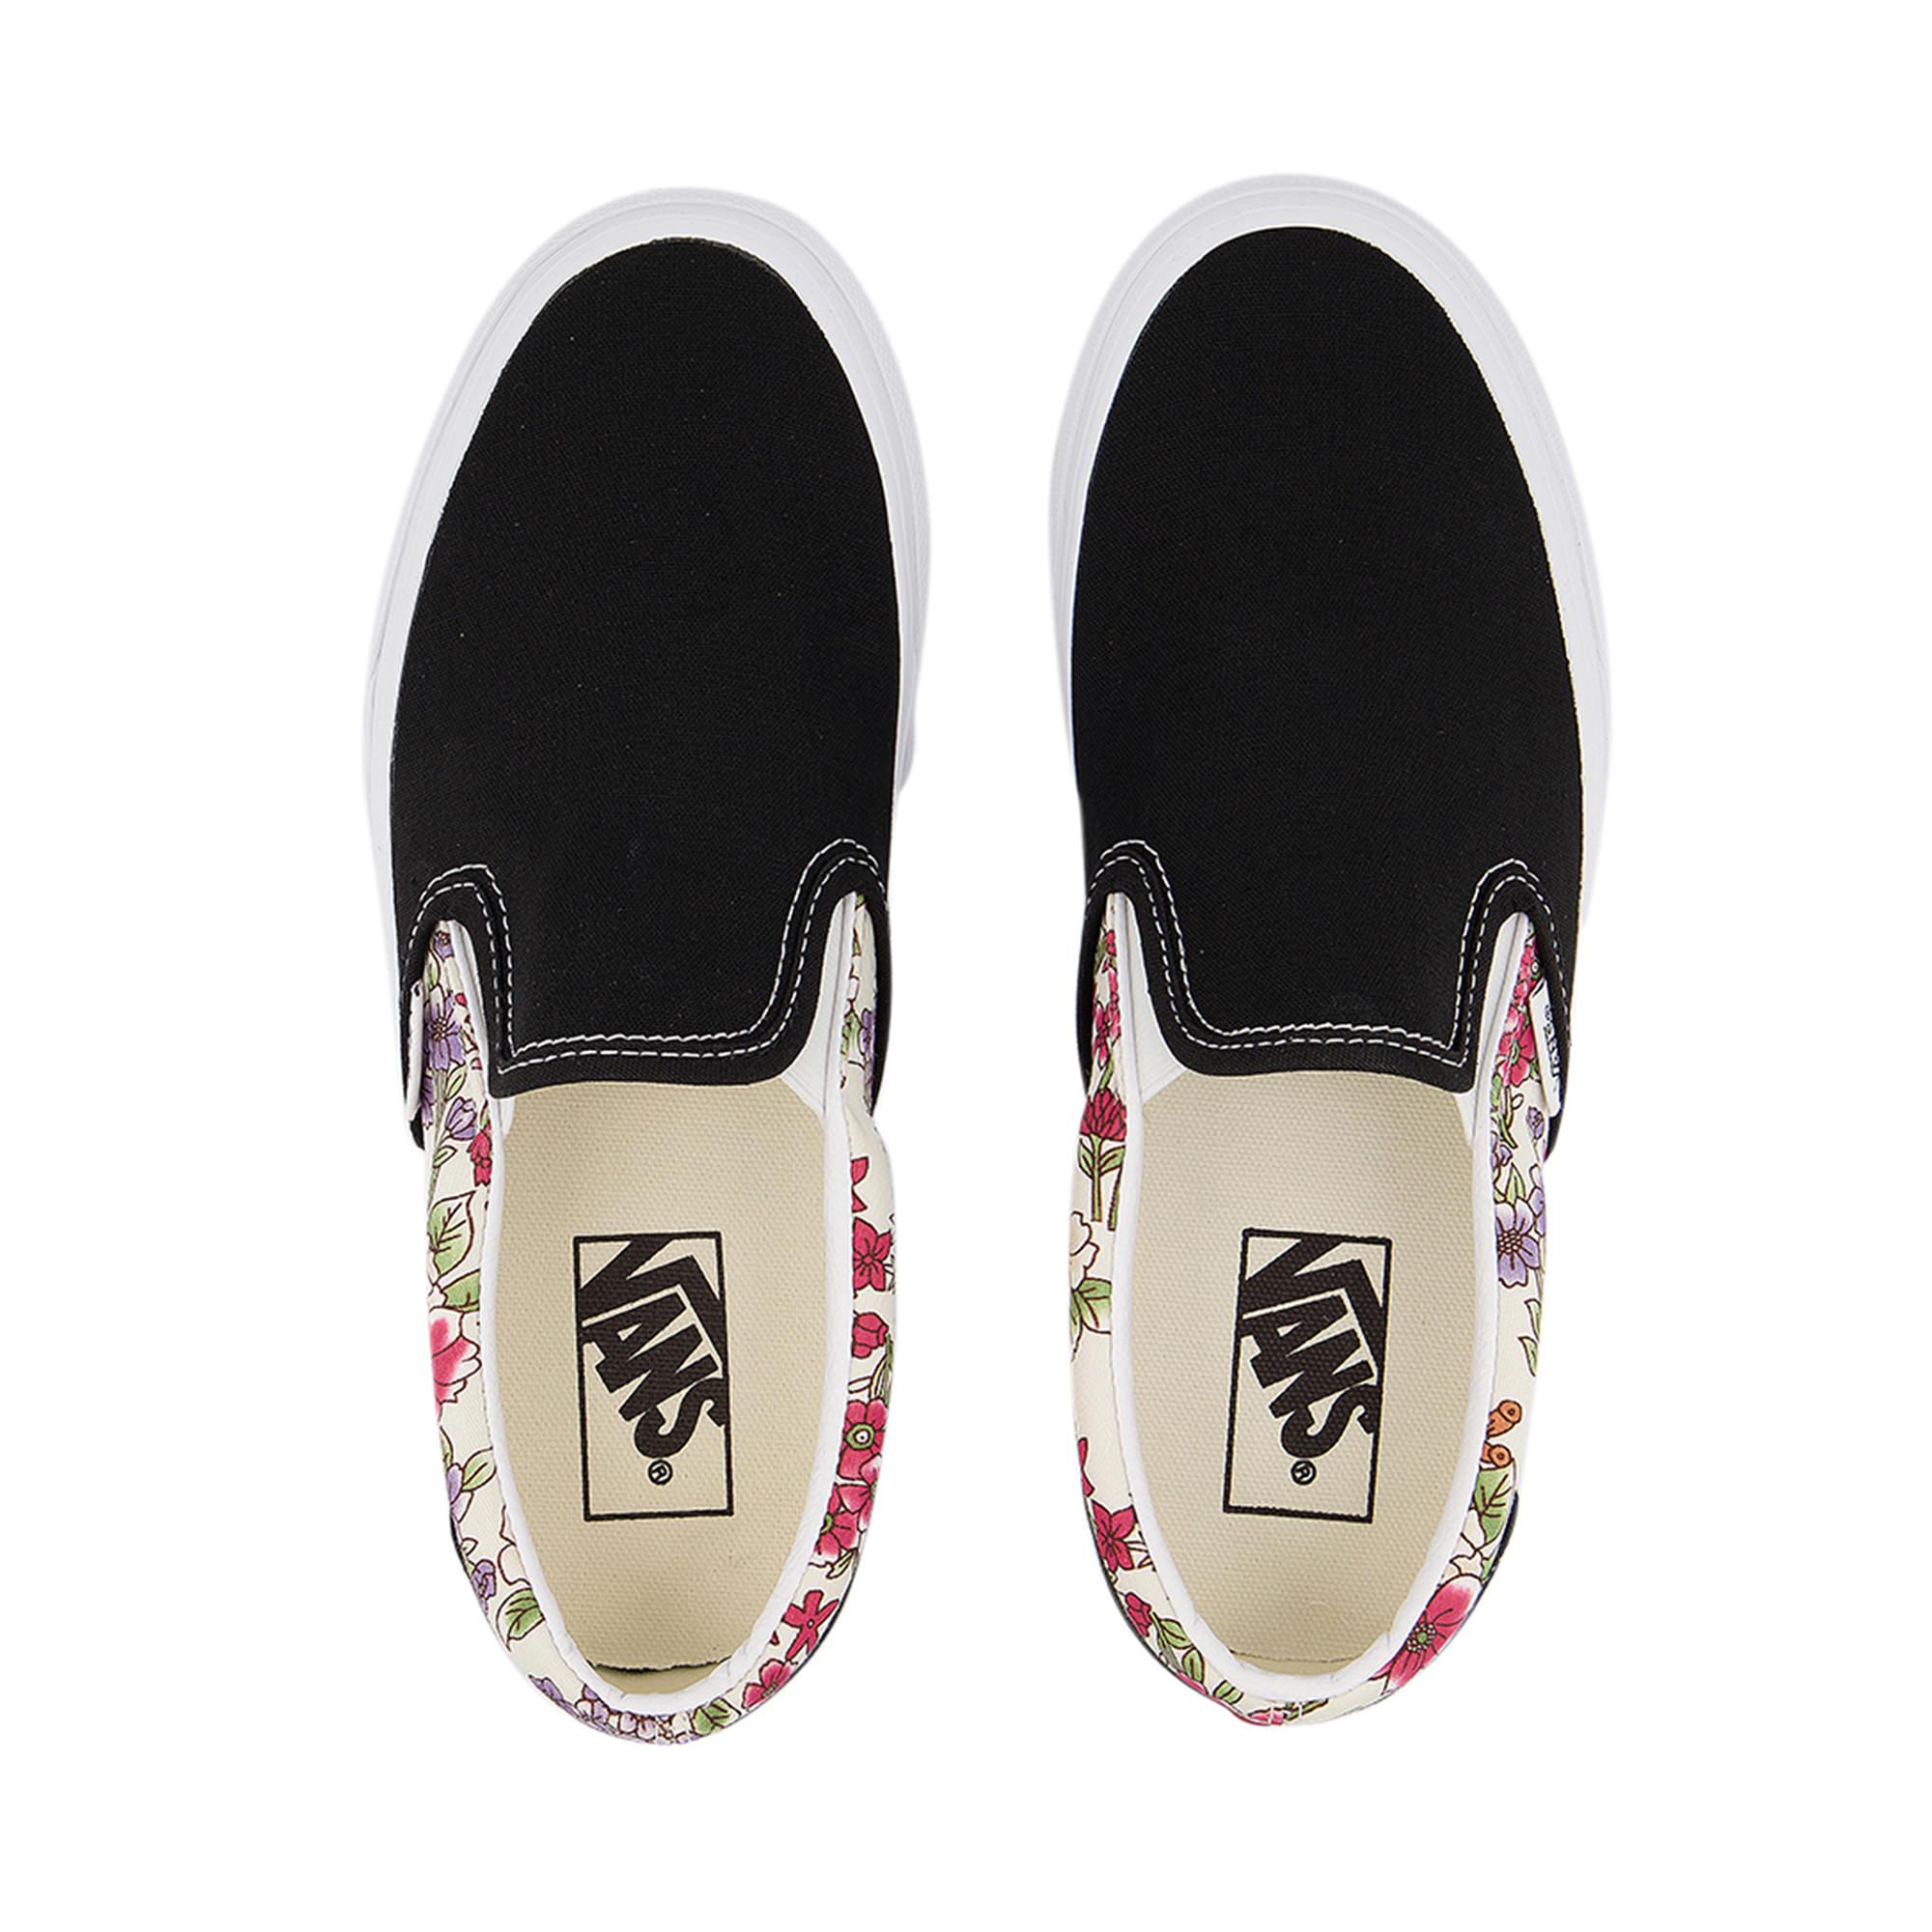 Classic Slip On Trainers